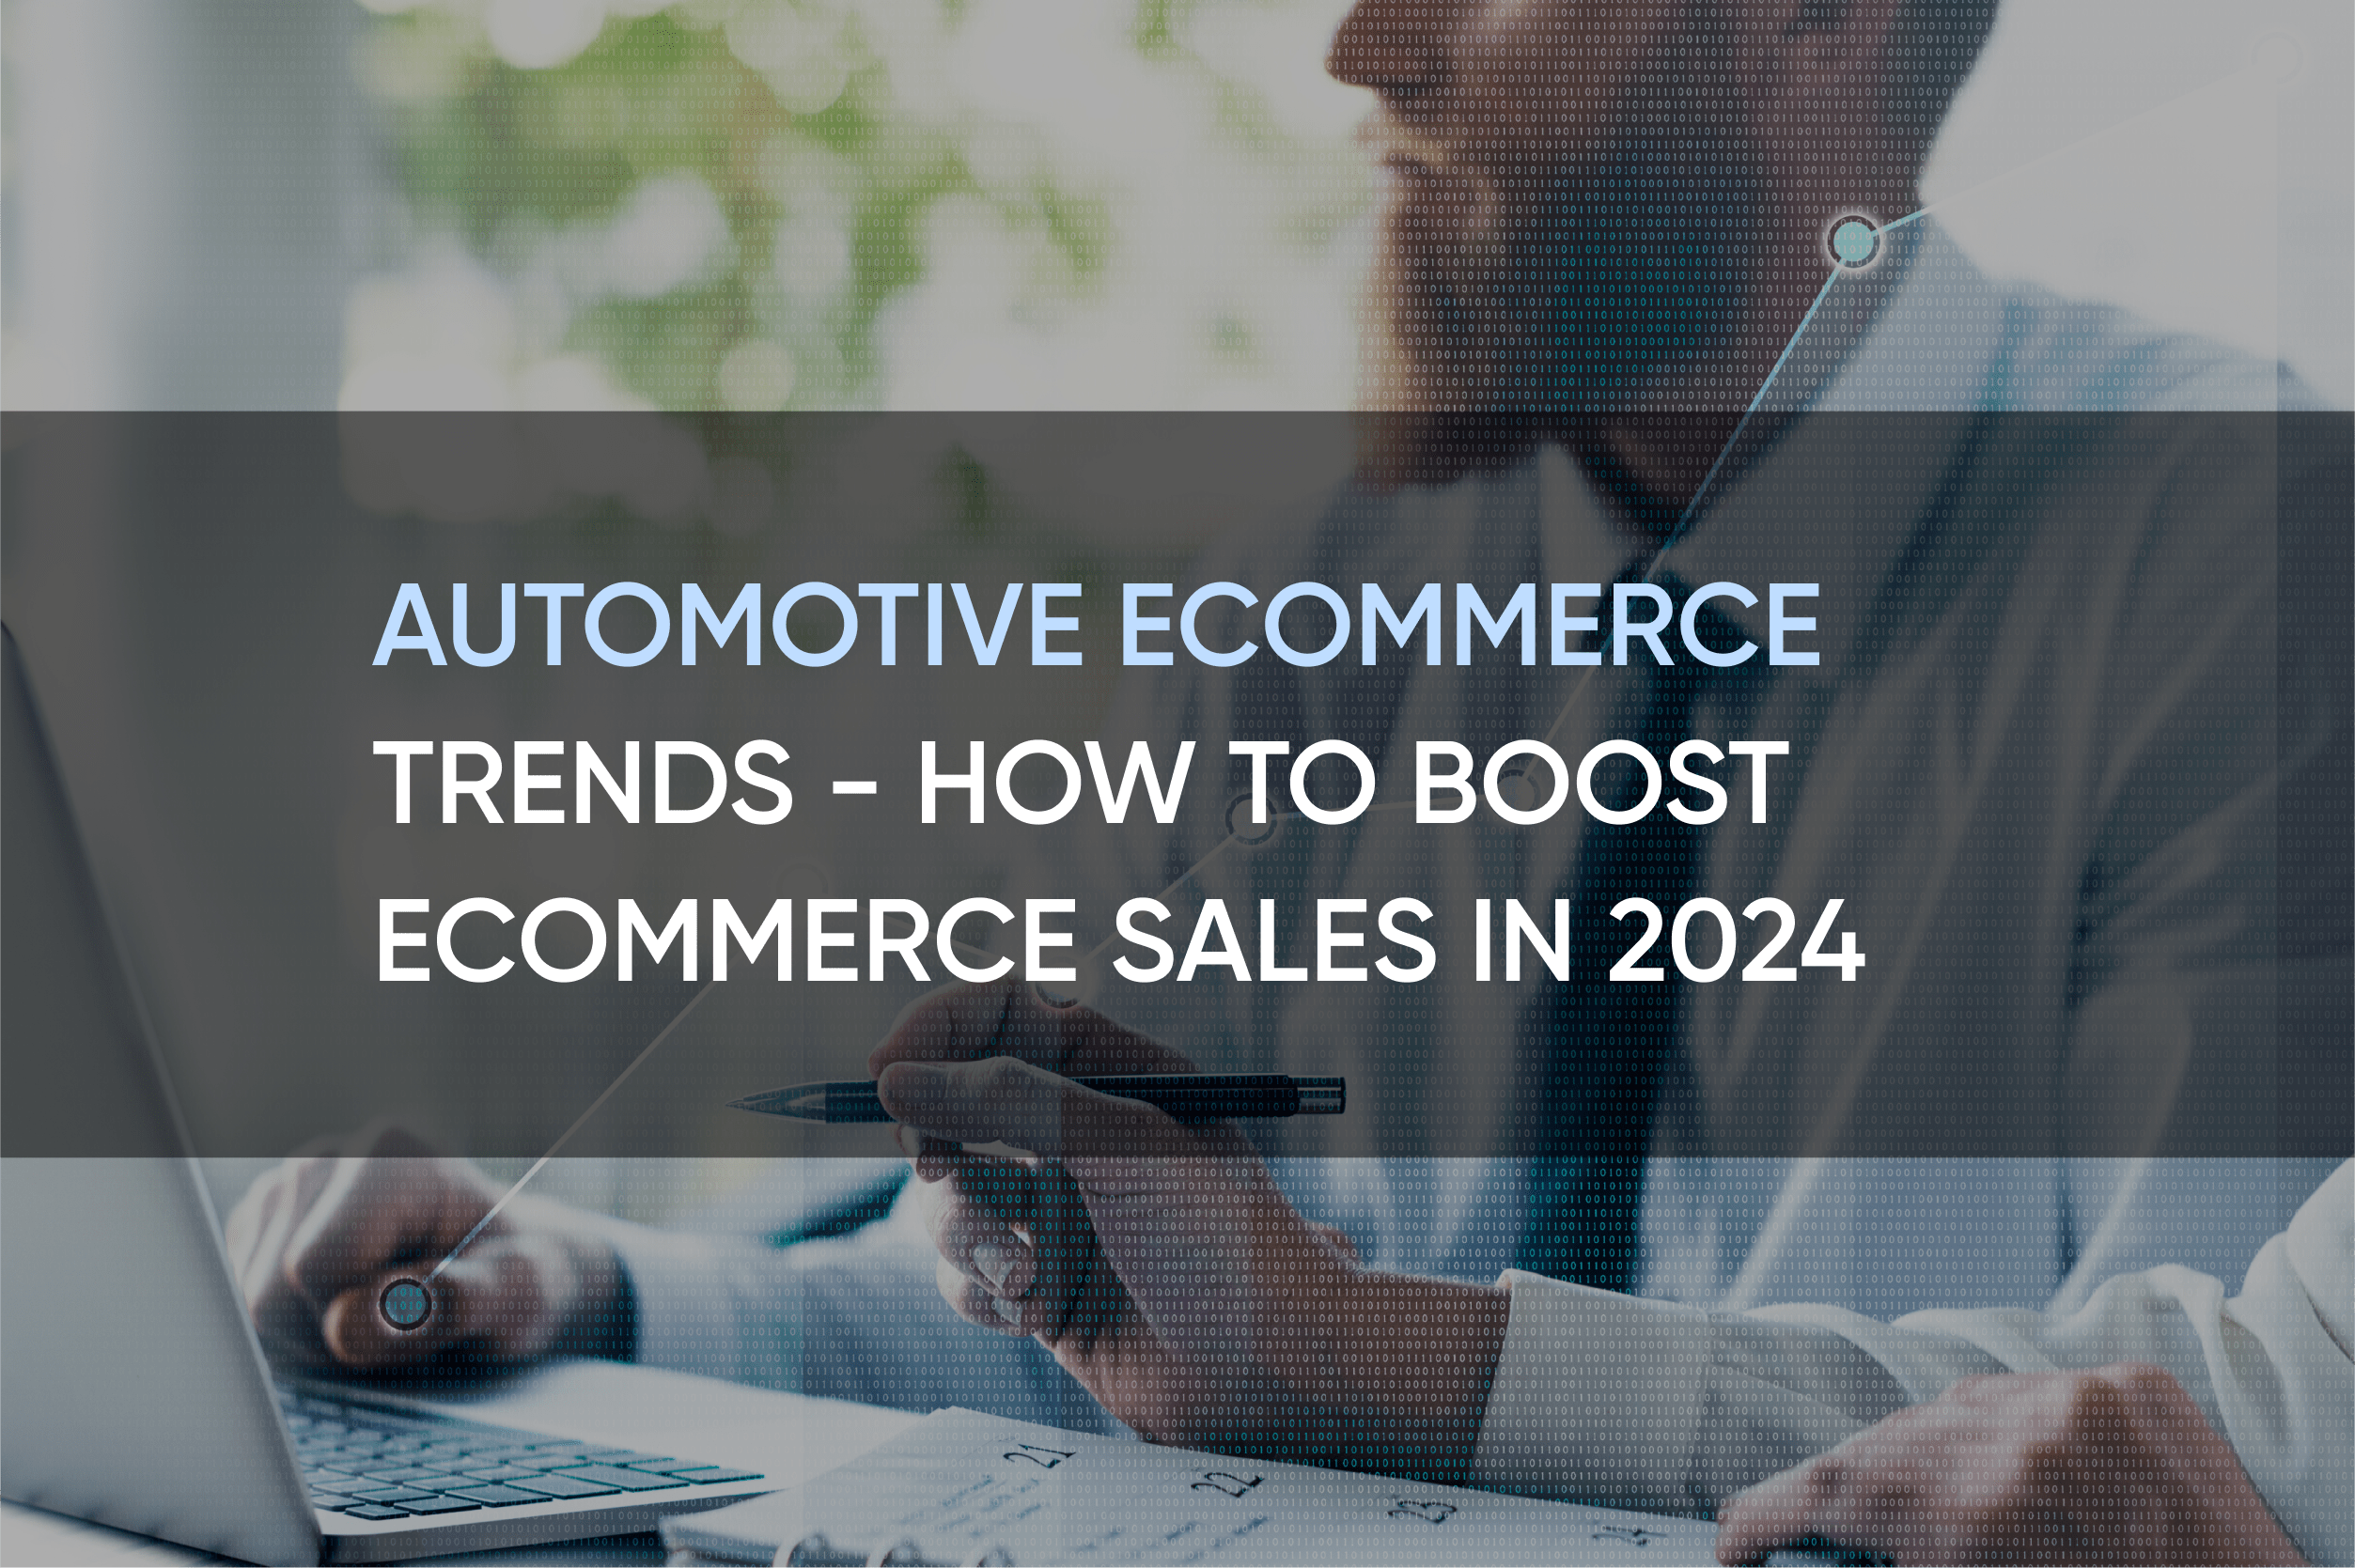 Automotive eCommerce Trends - How to Boost eCommerce Sales in 2024 | SolidBrain